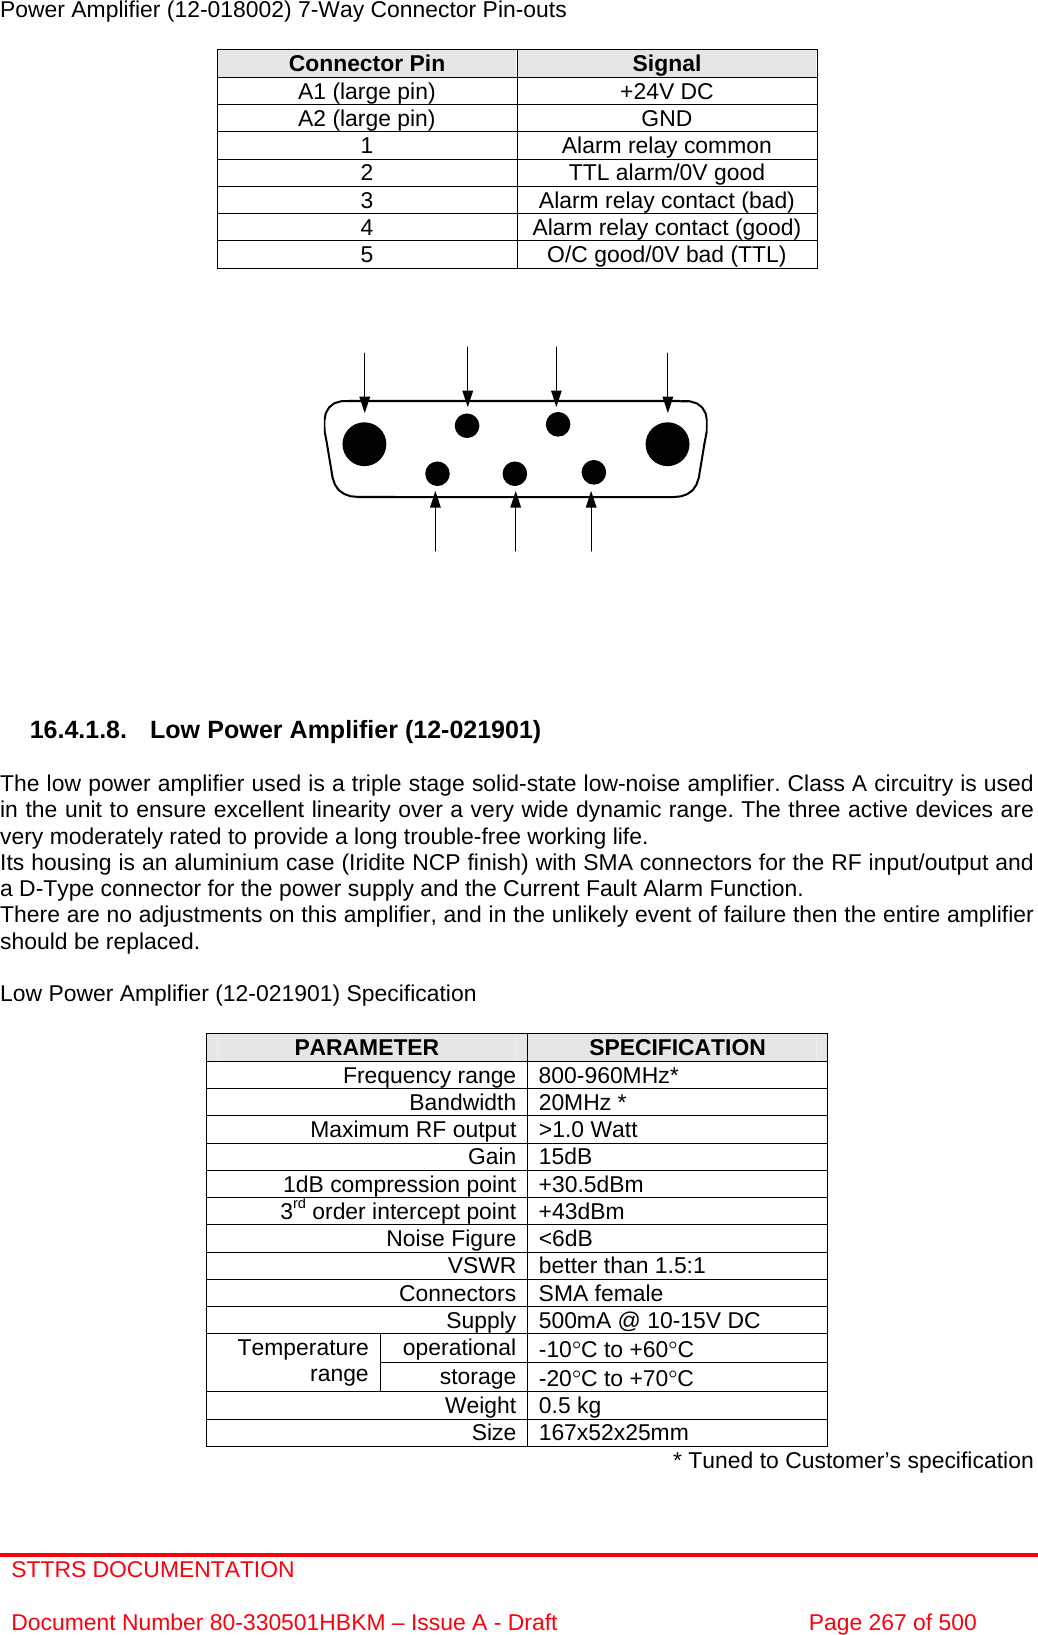 STTRS DOCUMENTATION  Document Number 80-330501HBKM – Issue A - Draft  Page 267 of 500   Power Amplifier (12-018002) 7-Way Connector Pin-outs  Connector Pin  Signal A1 (large pin)  +24V DC A2 (large pin)  GND 1  Alarm relay common 2  TTL alarm/0V good 3  Alarm relay contact (bad) 4  Alarm relay contact (good) 5  O/C good/0V bad (TTL)                  16.4.1.8.  Low Power Amplifier (12-021901)  The low power amplifier used is a triple stage solid-state low-noise amplifier. Class A circuitry is used in the unit to ensure excellent linearity over a very wide dynamic range. The three active devices are very moderately rated to provide a long trouble-free working life.  Its housing is an aluminium case (Iridite NCP finish) with SMA connectors for the RF input/output and a D-Type connector for the power supply and the Current Fault Alarm Function. There are no adjustments on this amplifier, and in the unlikely event of failure then the entire amplifier should be replaced.  Low Power Amplifier (12-021901) Specification  PARAMETER  SPECIFICATION Frequency range 800-960MHz* Bandwidth 20MHz * Maximum RF output &gt;1.0 Watt Gain 15dB 1dB compression point +30.5dBm 3rd order intercept point +43dBm Noise Figure &lt;6dB VSWR better than 1.5:1 Connectors SMA female Supply 500mA @ 10-15V DC operational -10°C to +60°C Temperature range  storage -20°C to +70°C Weight 0.5 kg Size 167x52x25mm * Tuned to Customer’s specification 